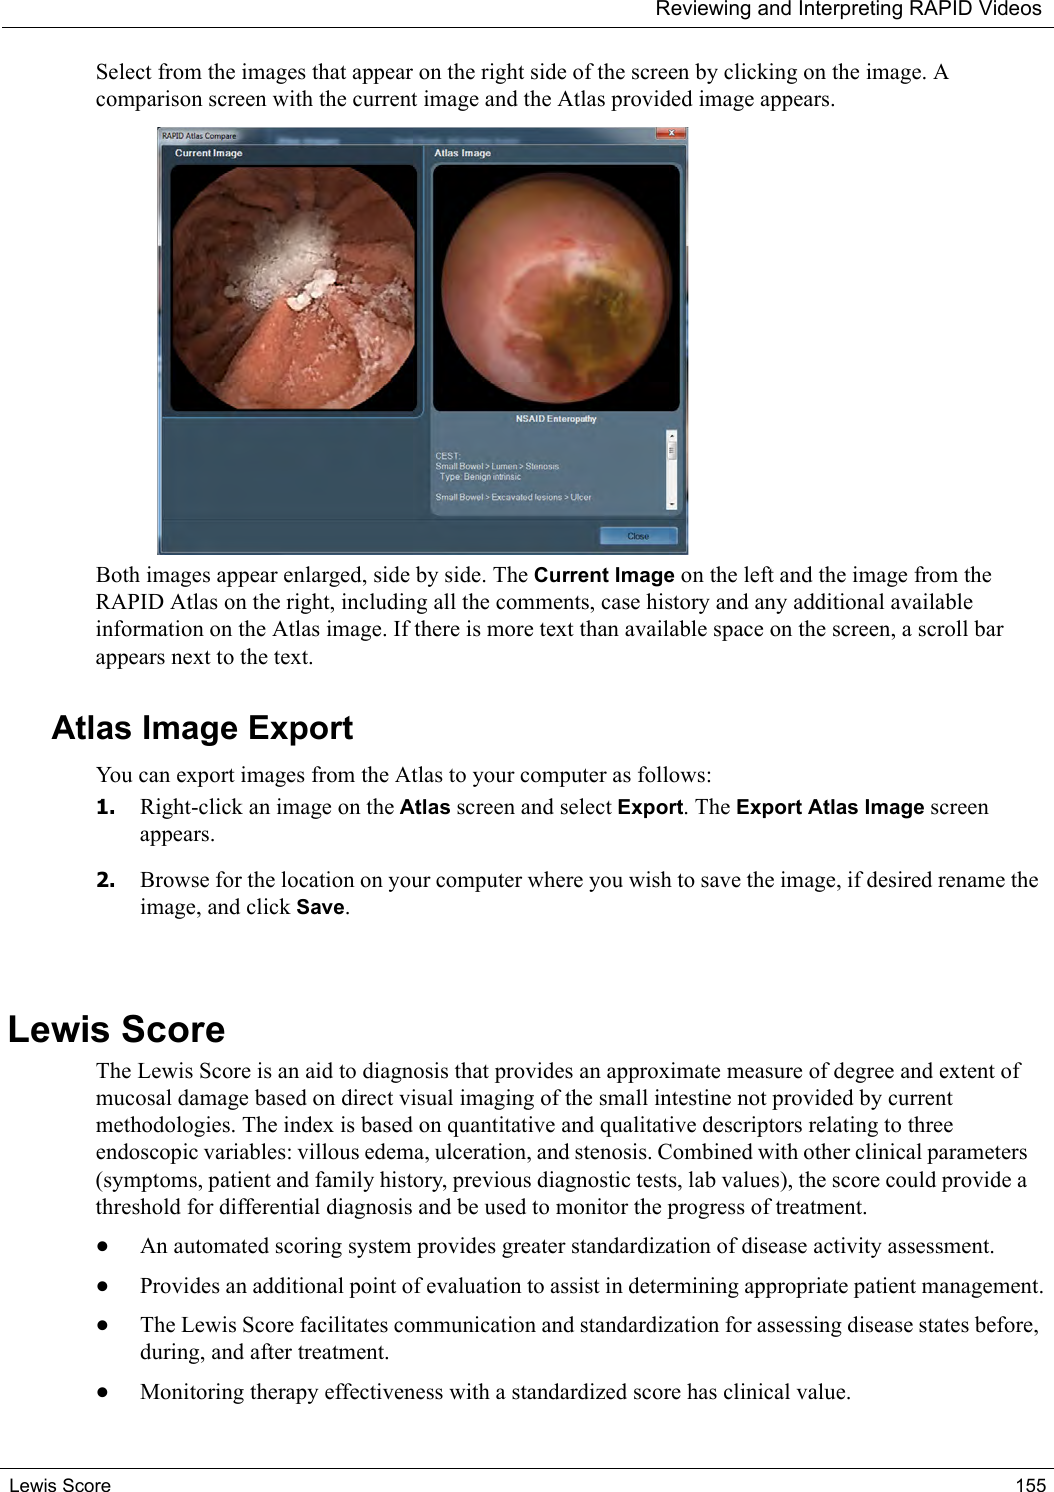 Reviewing and Interpreting RAPID VideosLewis Score 155Select from the images that appear on the right side of the screen by clicking on the image. A comparison screen with the current image and the Atlas provided image appears.Both images appear enlarged, side by side. The Current Image on the left and the image from the RAPID Atlas on the right, including all the comments, case history and any additional available information on the Atlas image. If there is more text than available space on the screen, a scroll bar appears next to the text.Atlas Image Export You can export images from the Atlas to your computer as follows:1. Right-click an image on the Atlas screen and select Export. The Export Atlas Image screen appears.2. Browse for the location on your computer where you wish to save the image, if desired rename the image, and click Save.Lewis Score The Lewis Score is an aid to diagnosis that provides an approximate measure of degree and extent of mucosal damage based on direct visual imaging of the small intestine not provided by current methodologies. The index is based on quantitative and qualitative descriptors relating to three endoscopic variables: villous edema, ulceration, and stenosis. Combined with other clinical parameters (symptoms, patient and family history, previous diagnostic tests, lab values), the score could provide a threshold for differential diagnosis and be used to monitor the progress of treatment.•An automated scoring system provides greater standardization of disease activity assessment.•Provides an additional point of evaluation to assist in determining appropriate patient management.•The Lewis Score facilitates communication and standardization for assessing disease states before, during, and after treatment.•Monitoring therapy effectiveness with a standardized score has clinical value.